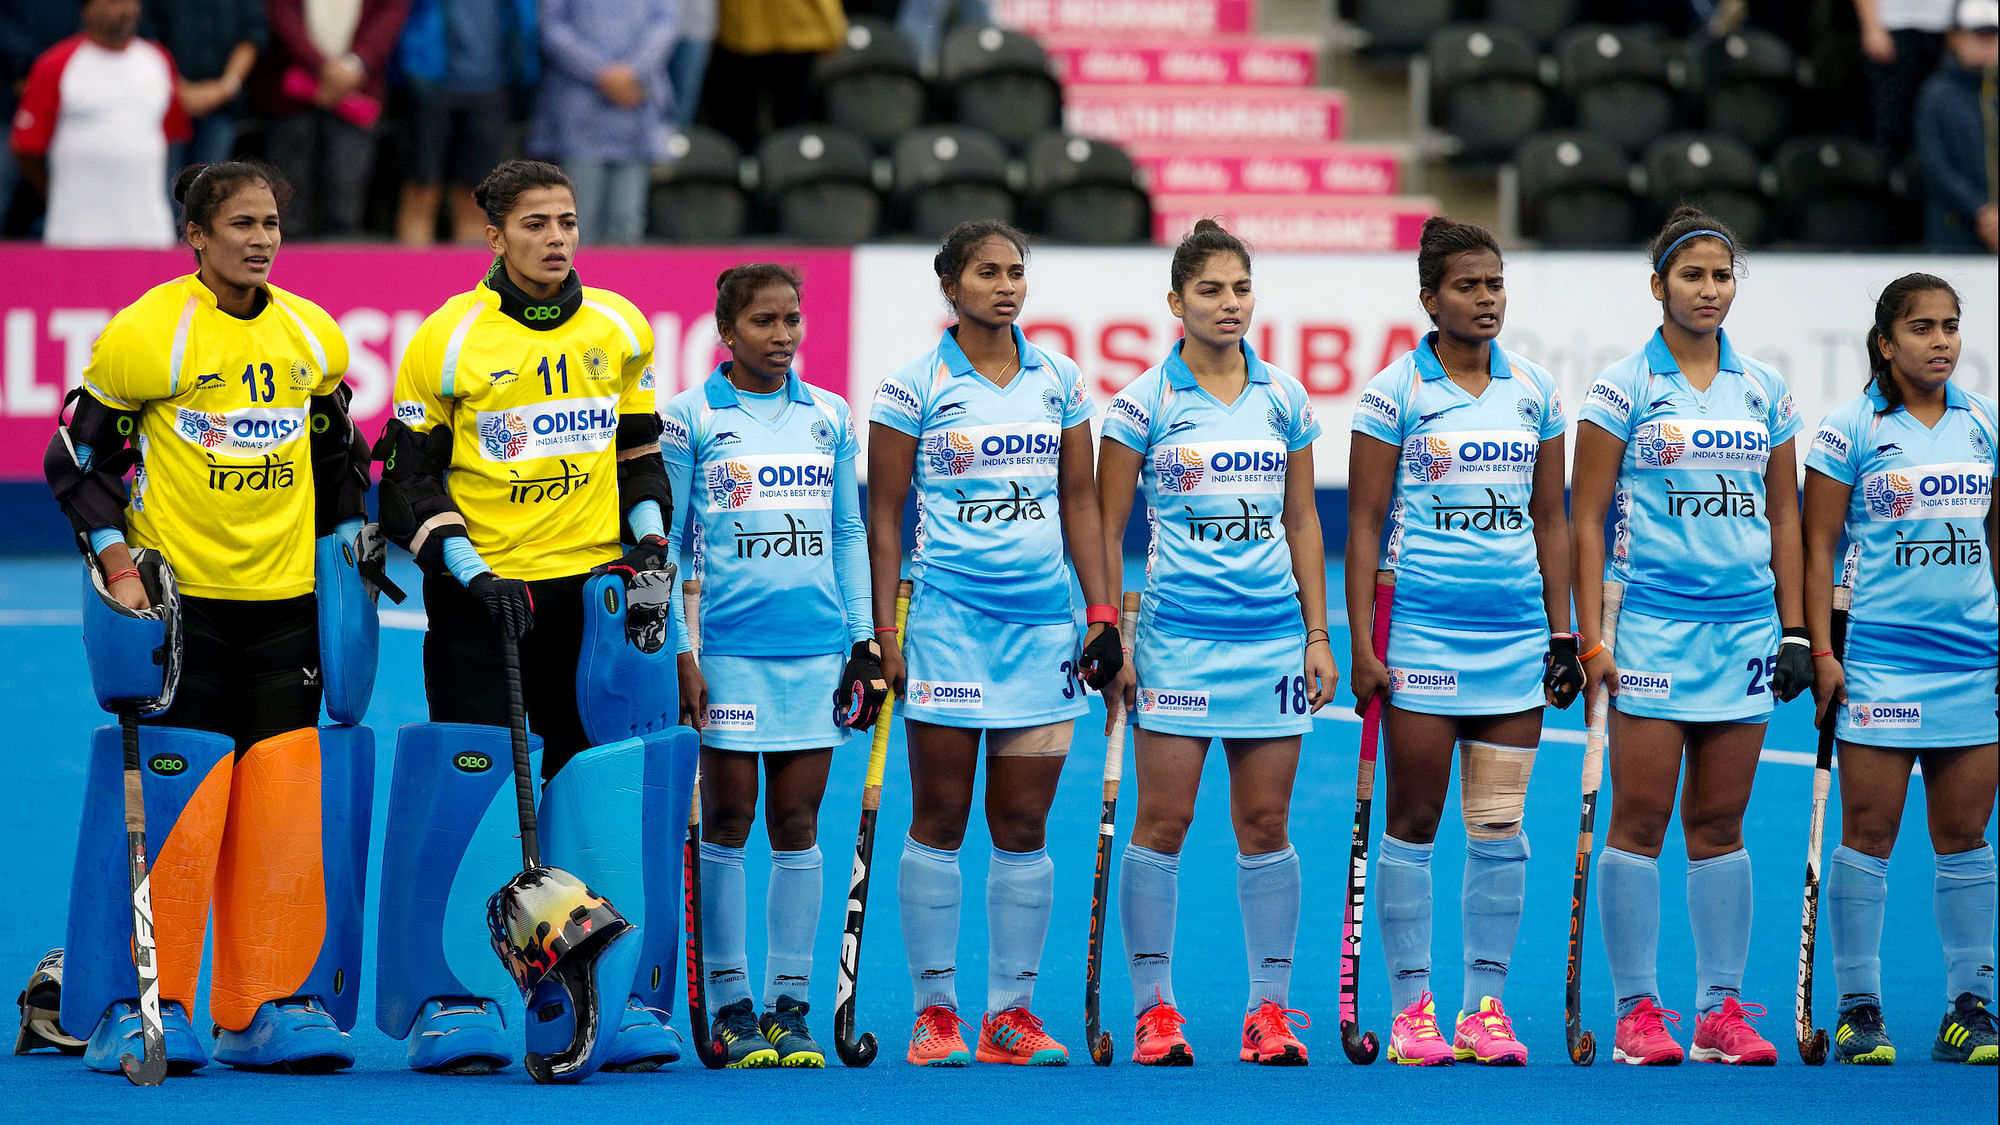 India play Italy in the crossovers match, for a place in the quarter-finals of the Women’s Hockey World Cup on 31 July.